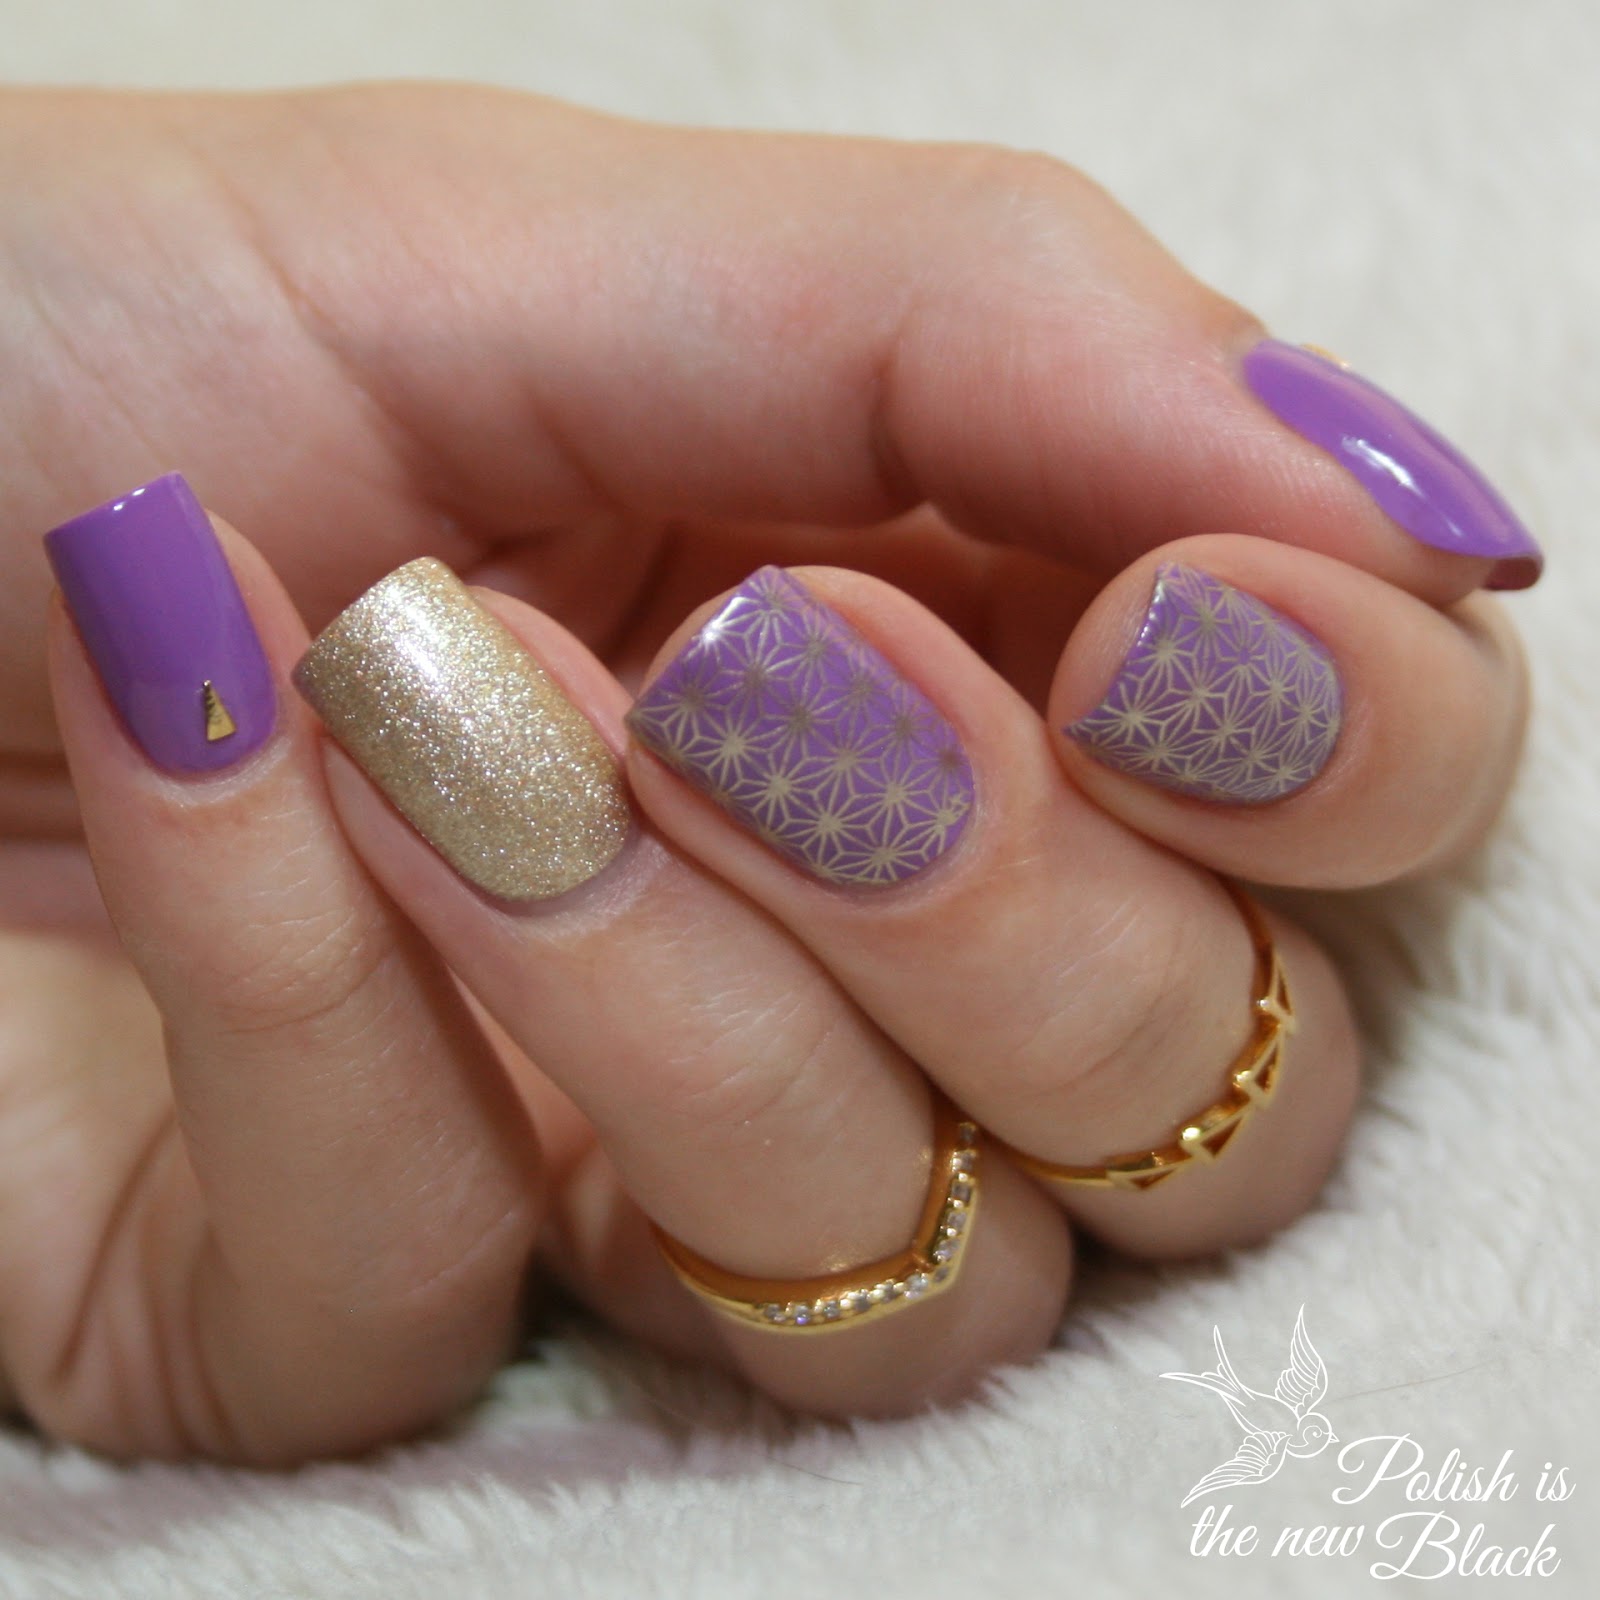 Lady Queen Beauty: Hehe 24 Stamping Plate Review / Polish Is The New Black